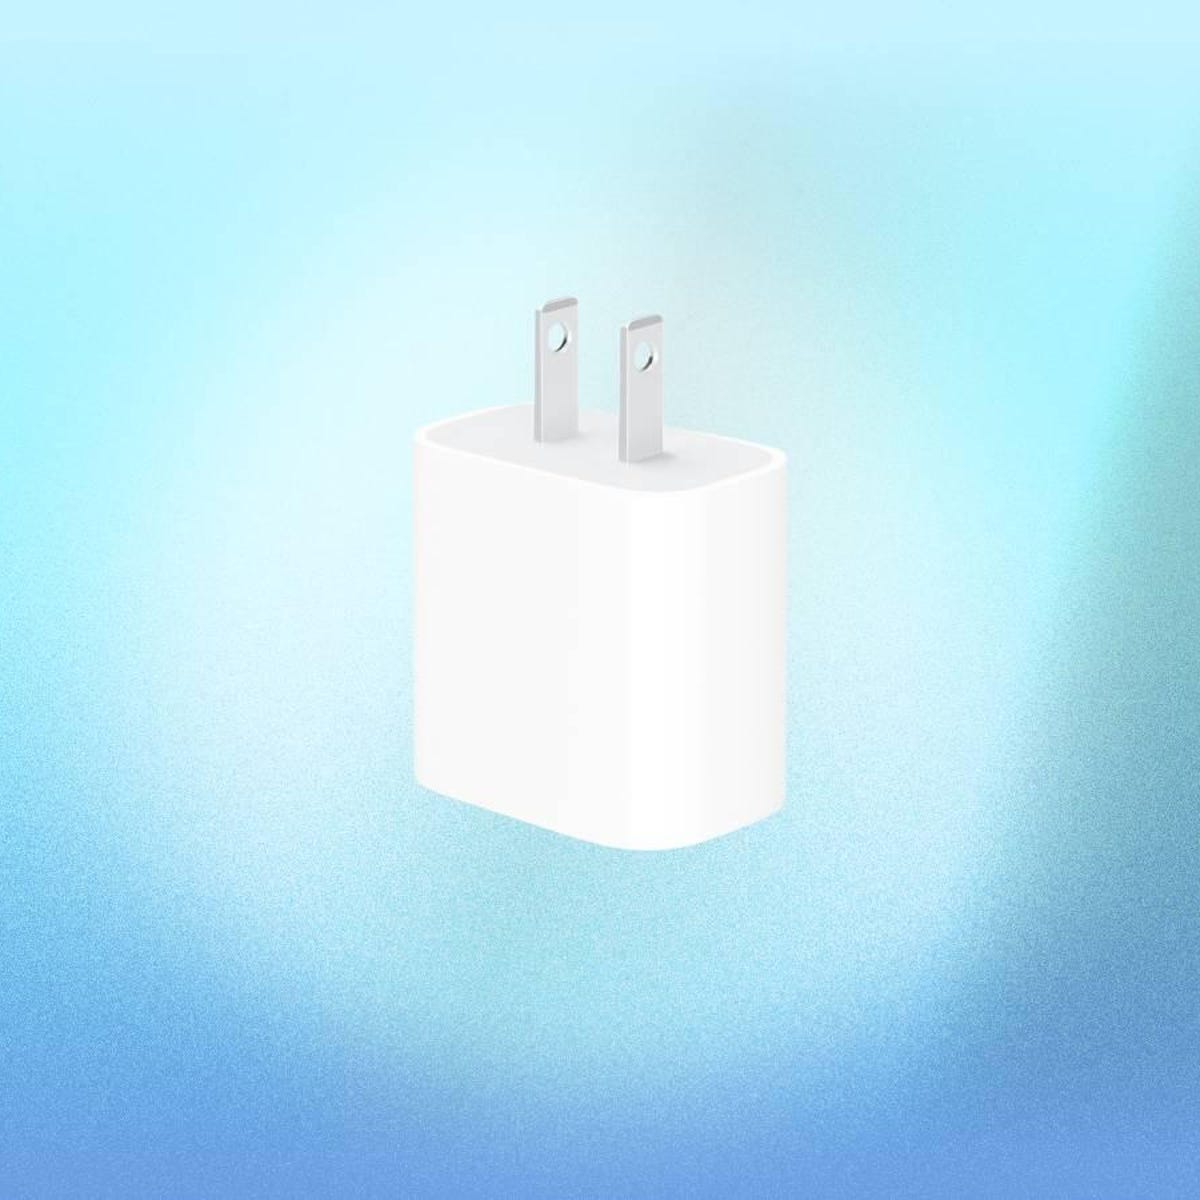 Get Your Hands on a 20W Apple Power Adapter for Just $13 - CNET